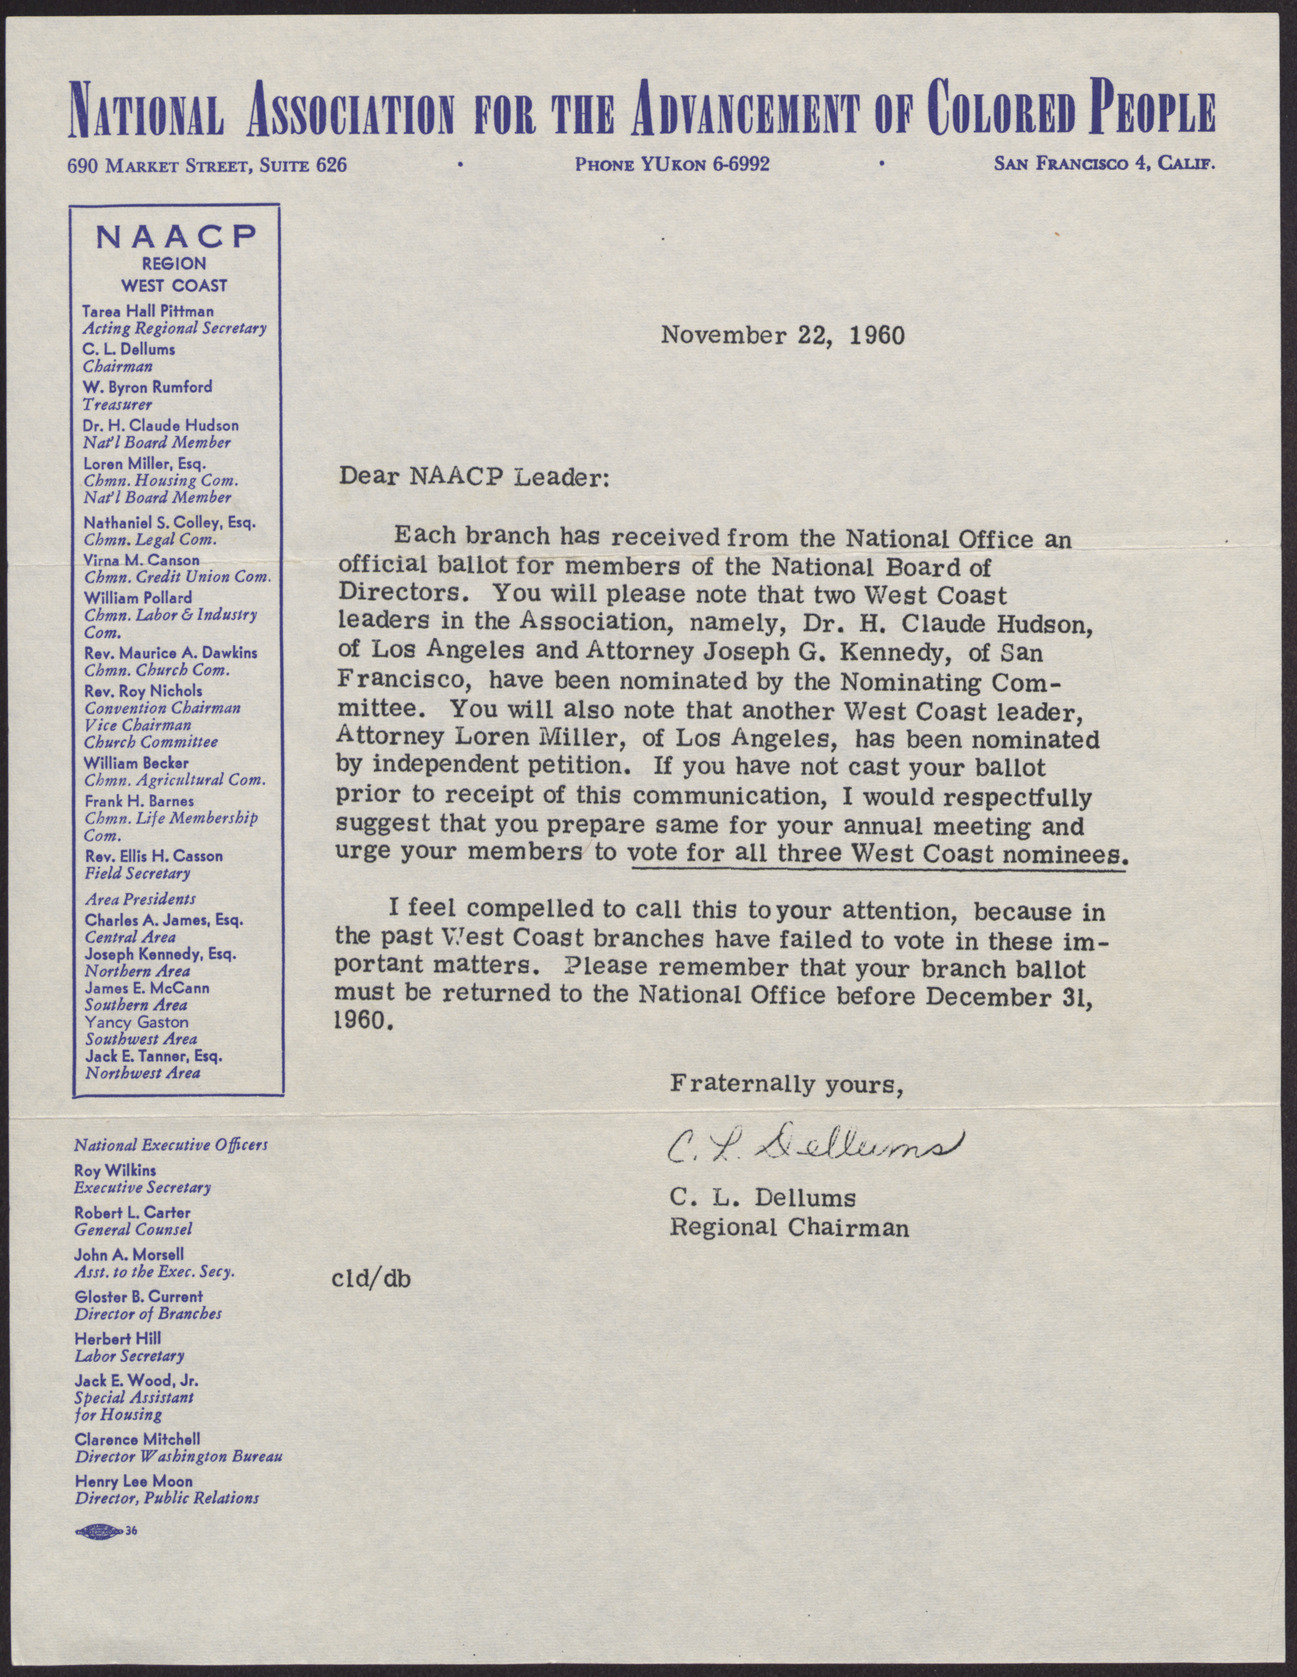 Letter to unnamed NAACP Leaders from C. L. Dellums, November 22, 1960